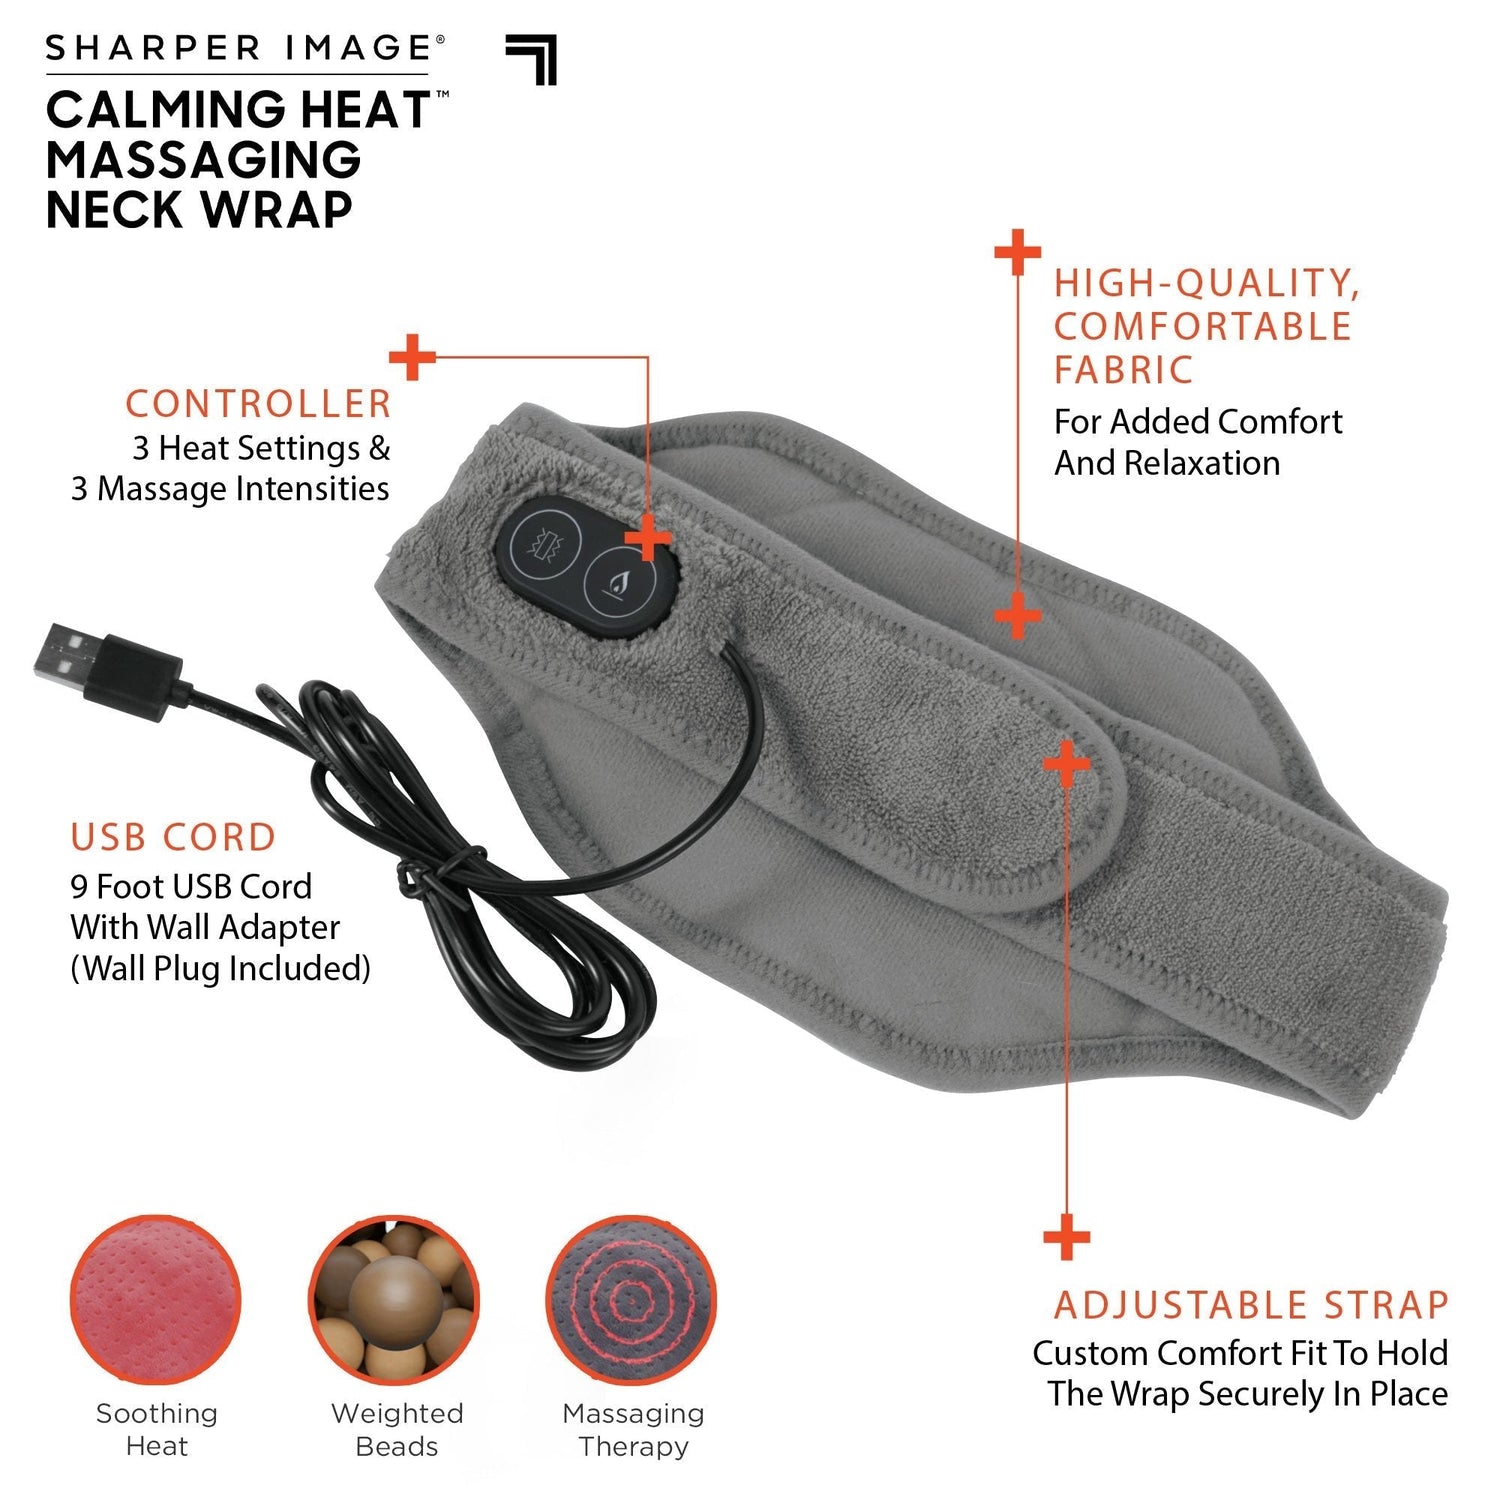 Comfheat USB Neck Heating Pad with Vibration Heated Neck Wrap for